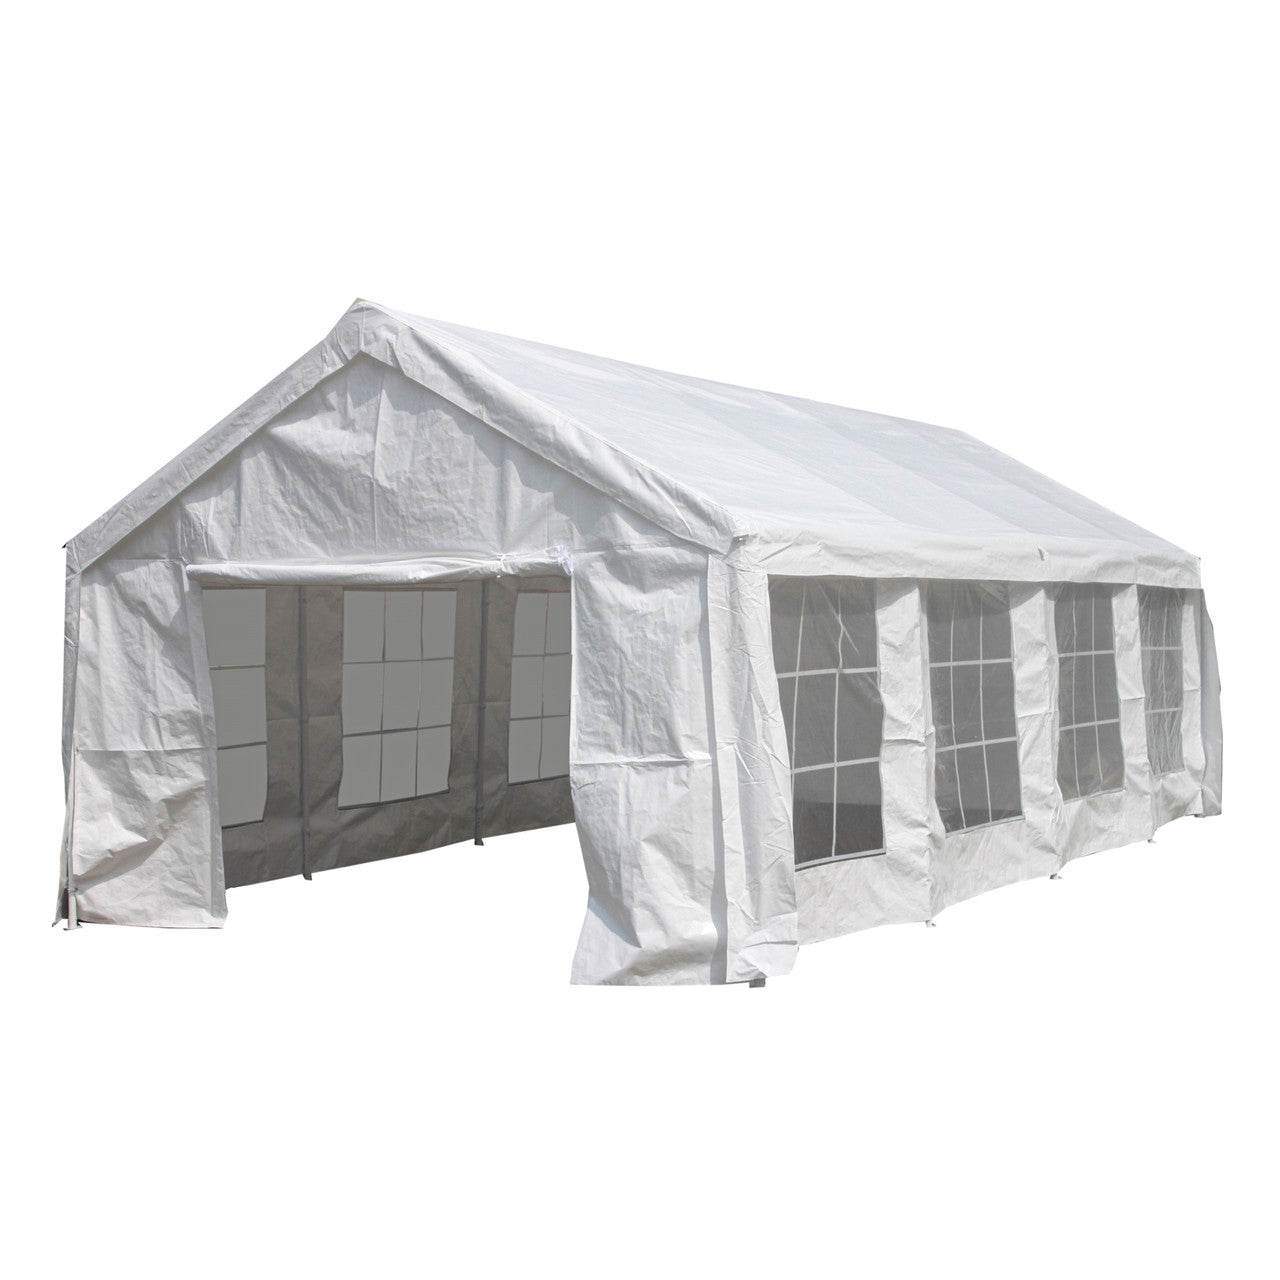 Aleko Heavy Duty Outdoor Canopy Event Tent with Windows - 13 X 26 FT - White PWT13X26-AP - Serenity Provision